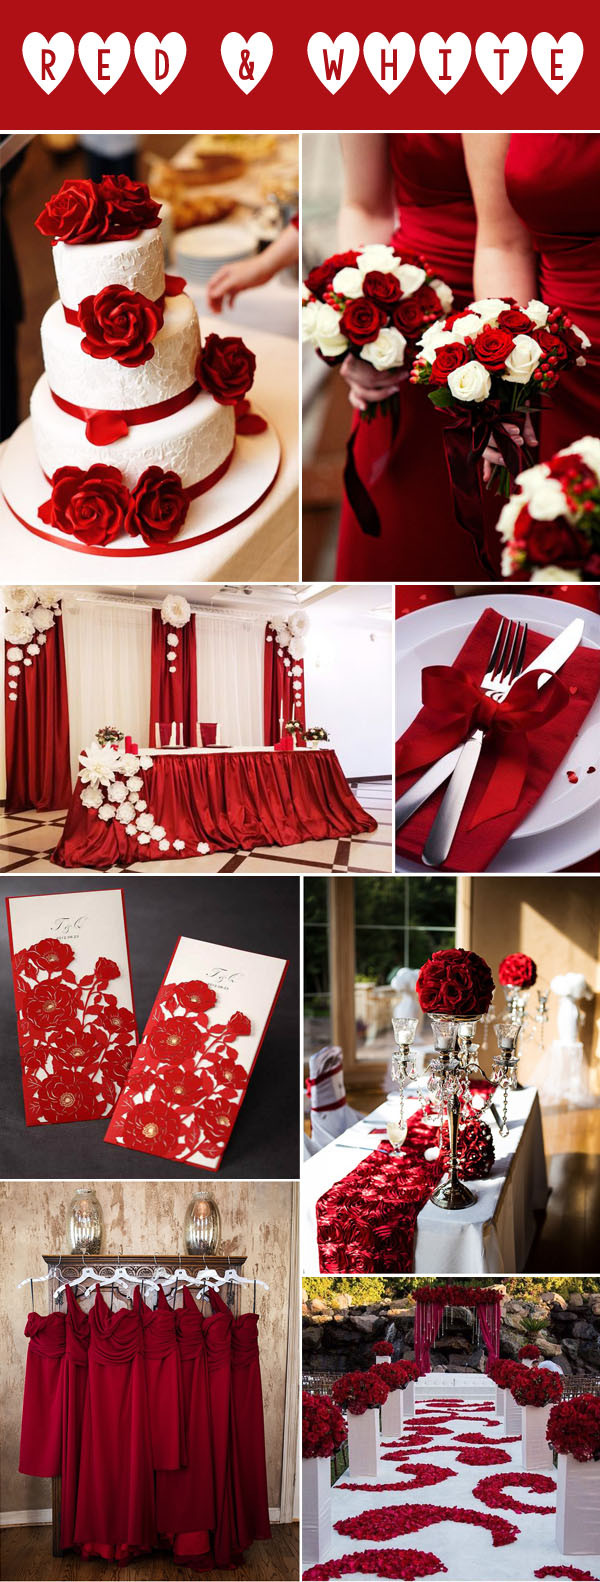 Red Wedding Theme Ideas
 40 Inspirational Classic Red and White Wedding Ideas